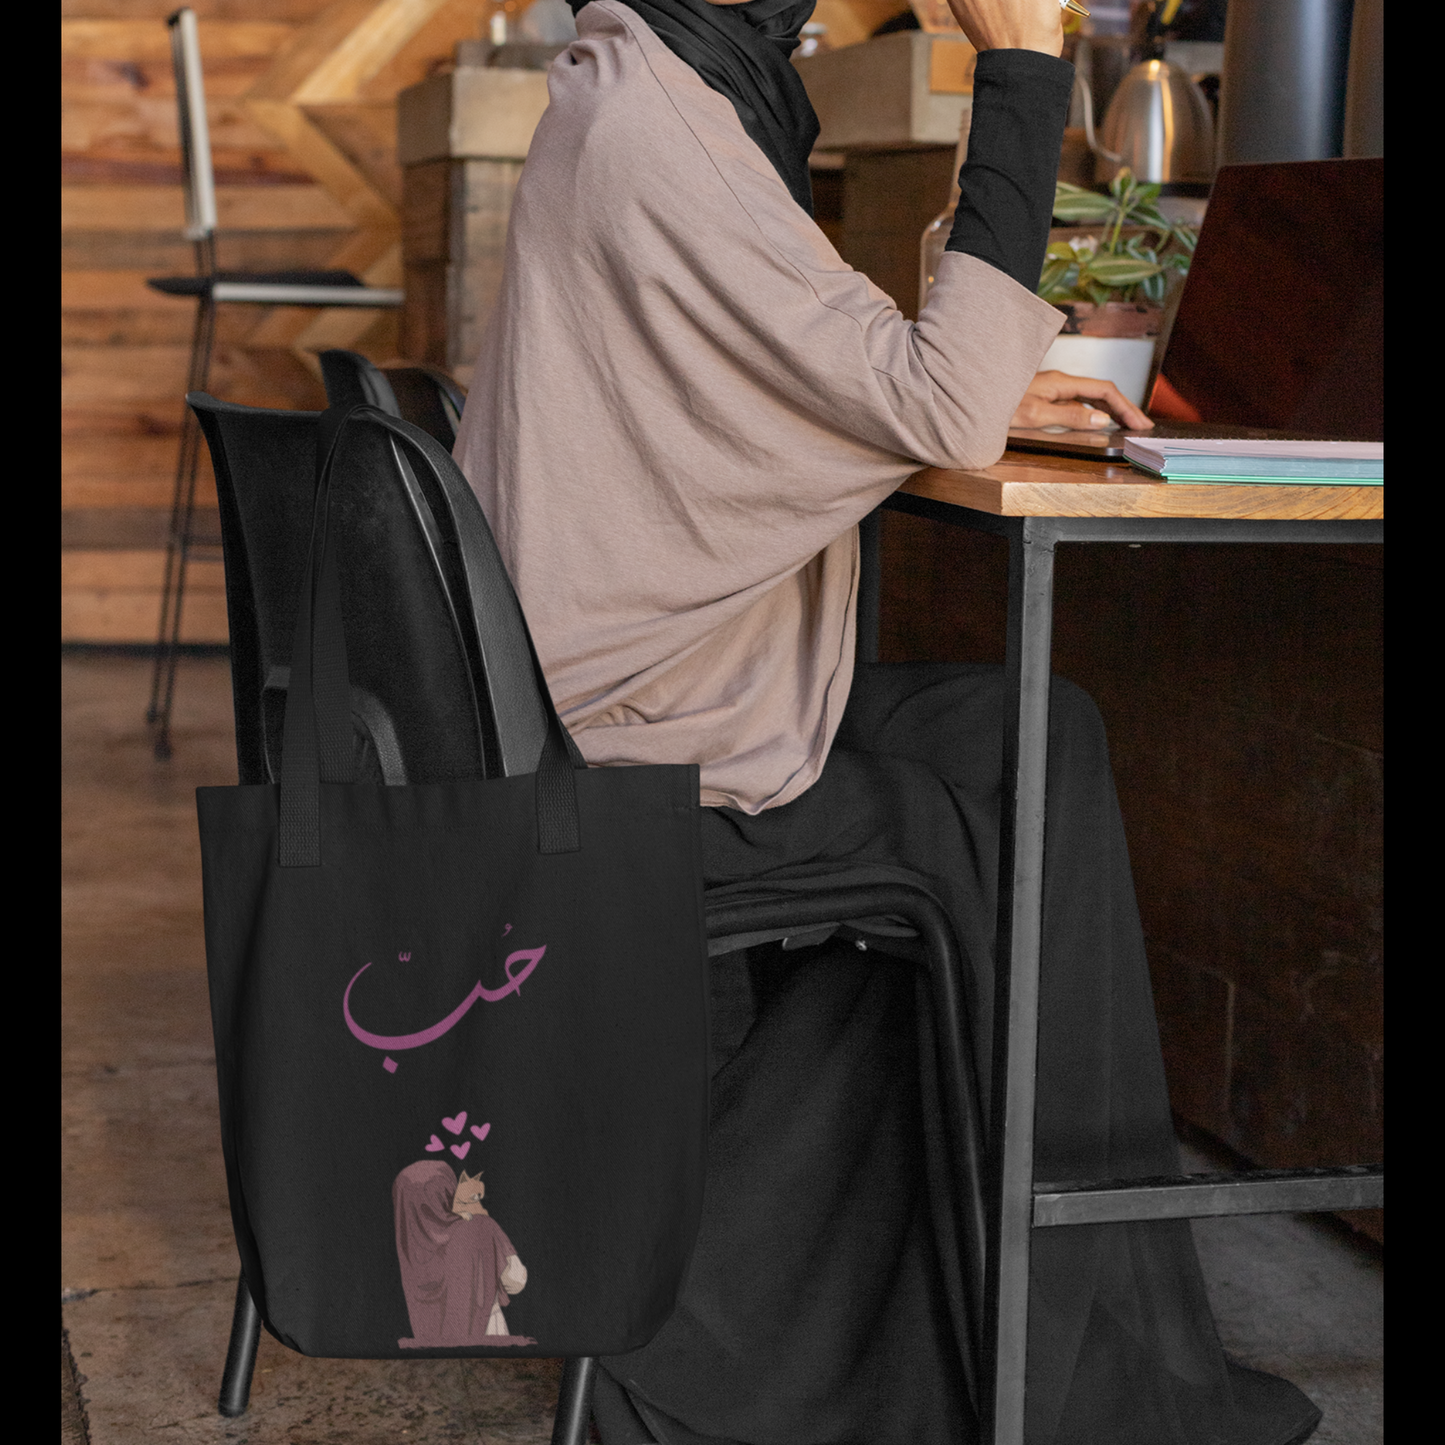 Love in Arabic with Hijabi and her Cat Black Canvas Tote